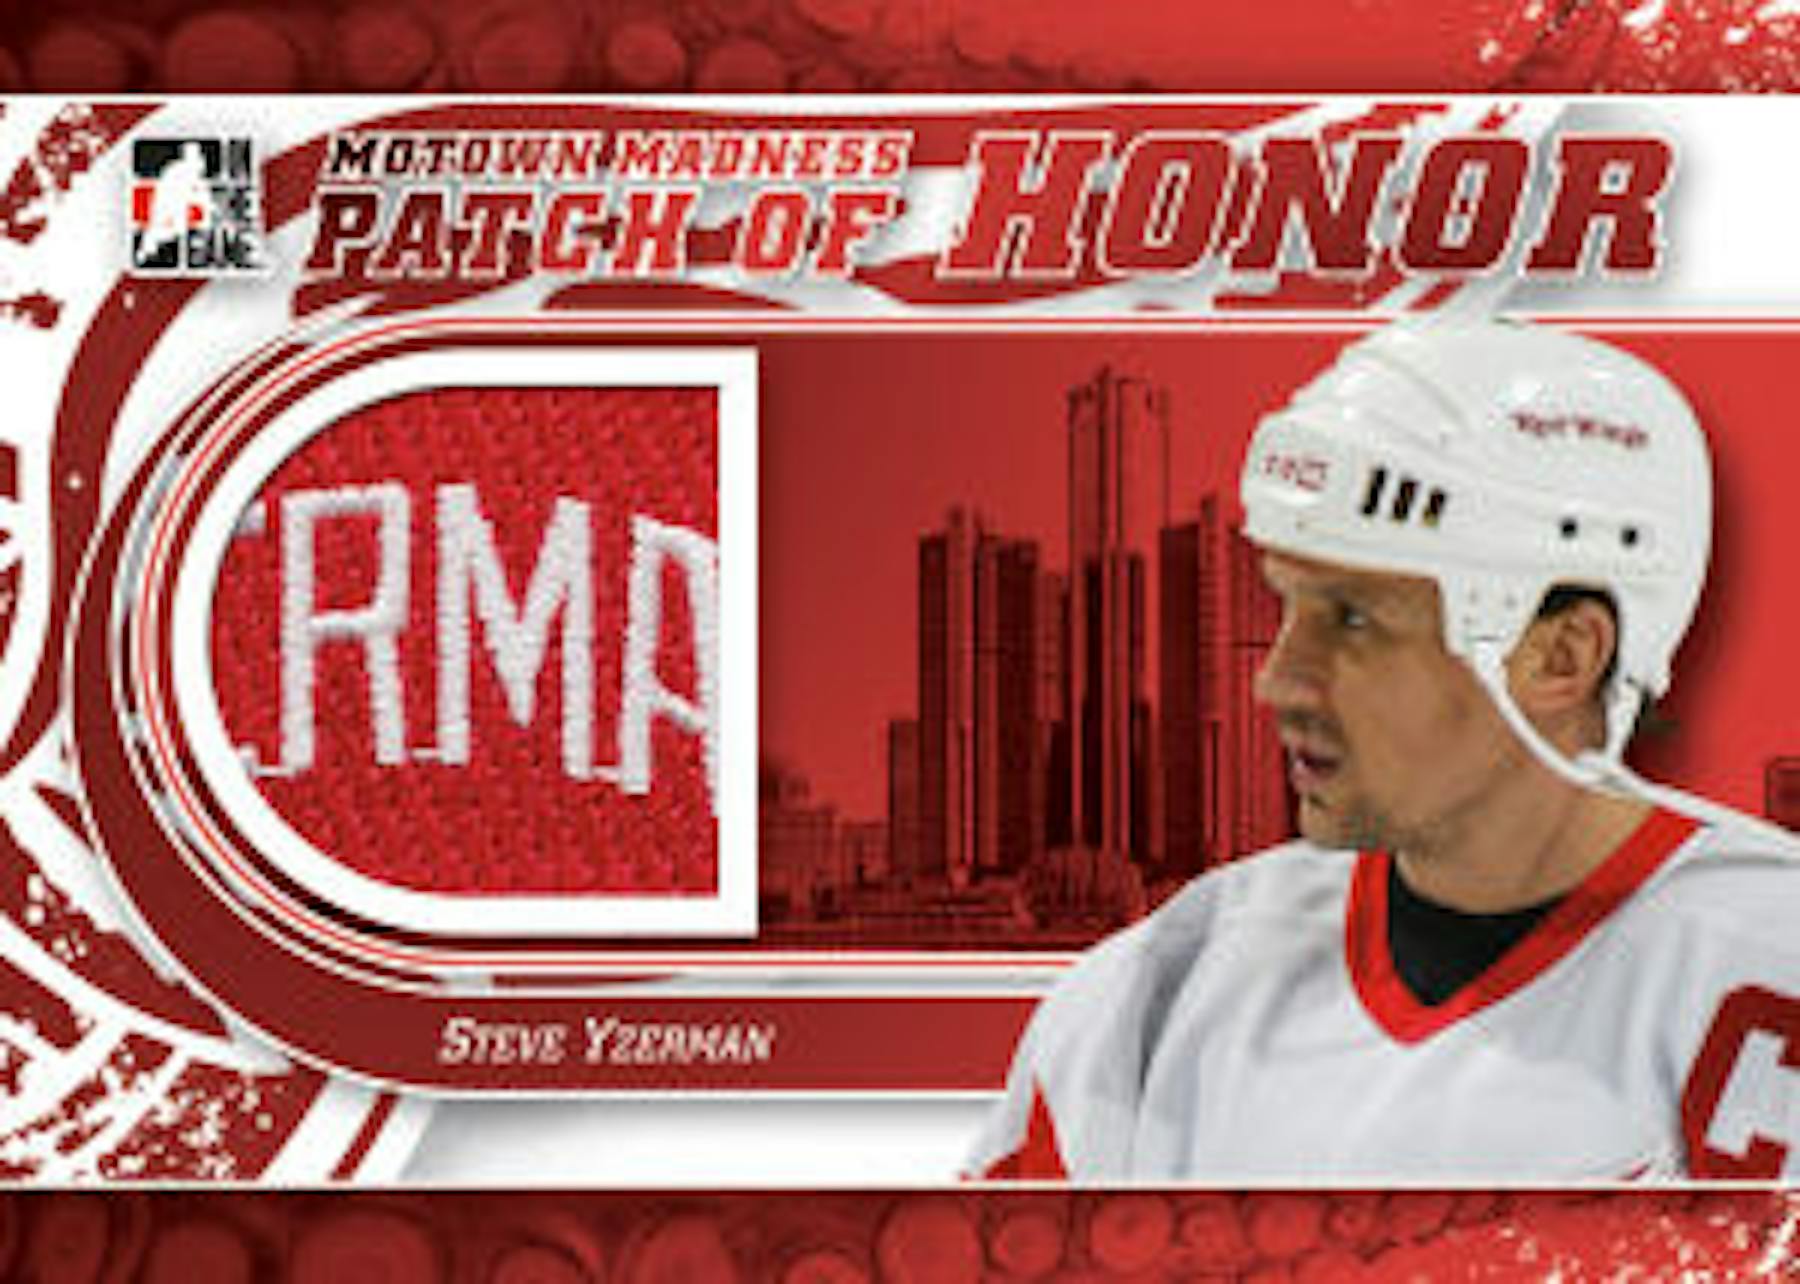 Steve Yzerman 2012-13 In The Game ITG Motown Madness Autographed